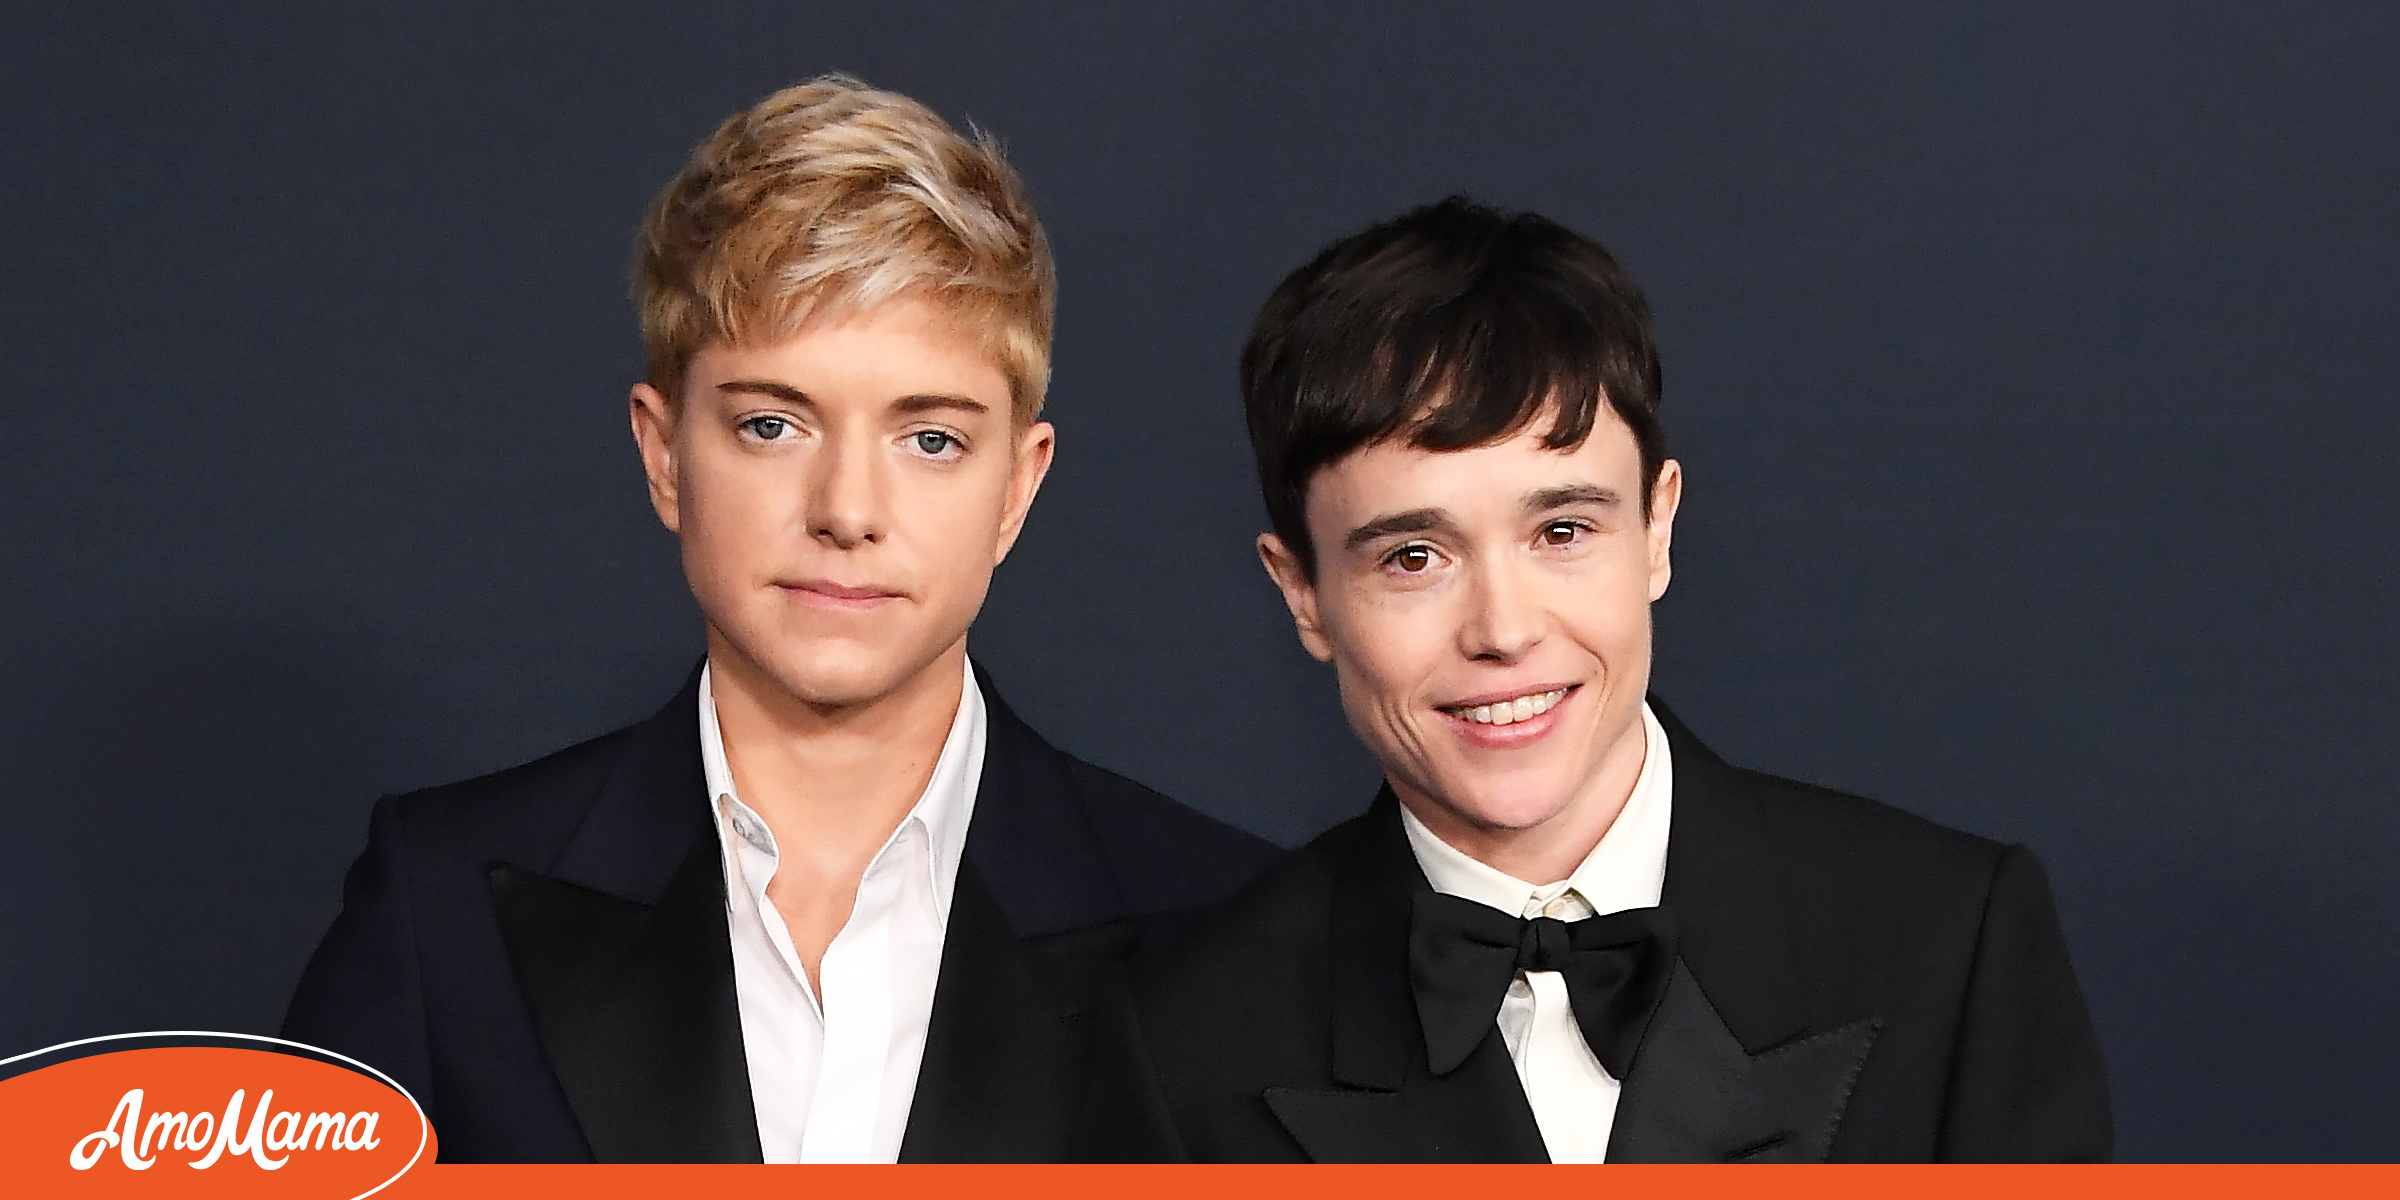 Is Elliot Page Mae Martin's Partner? More about Their Relationship